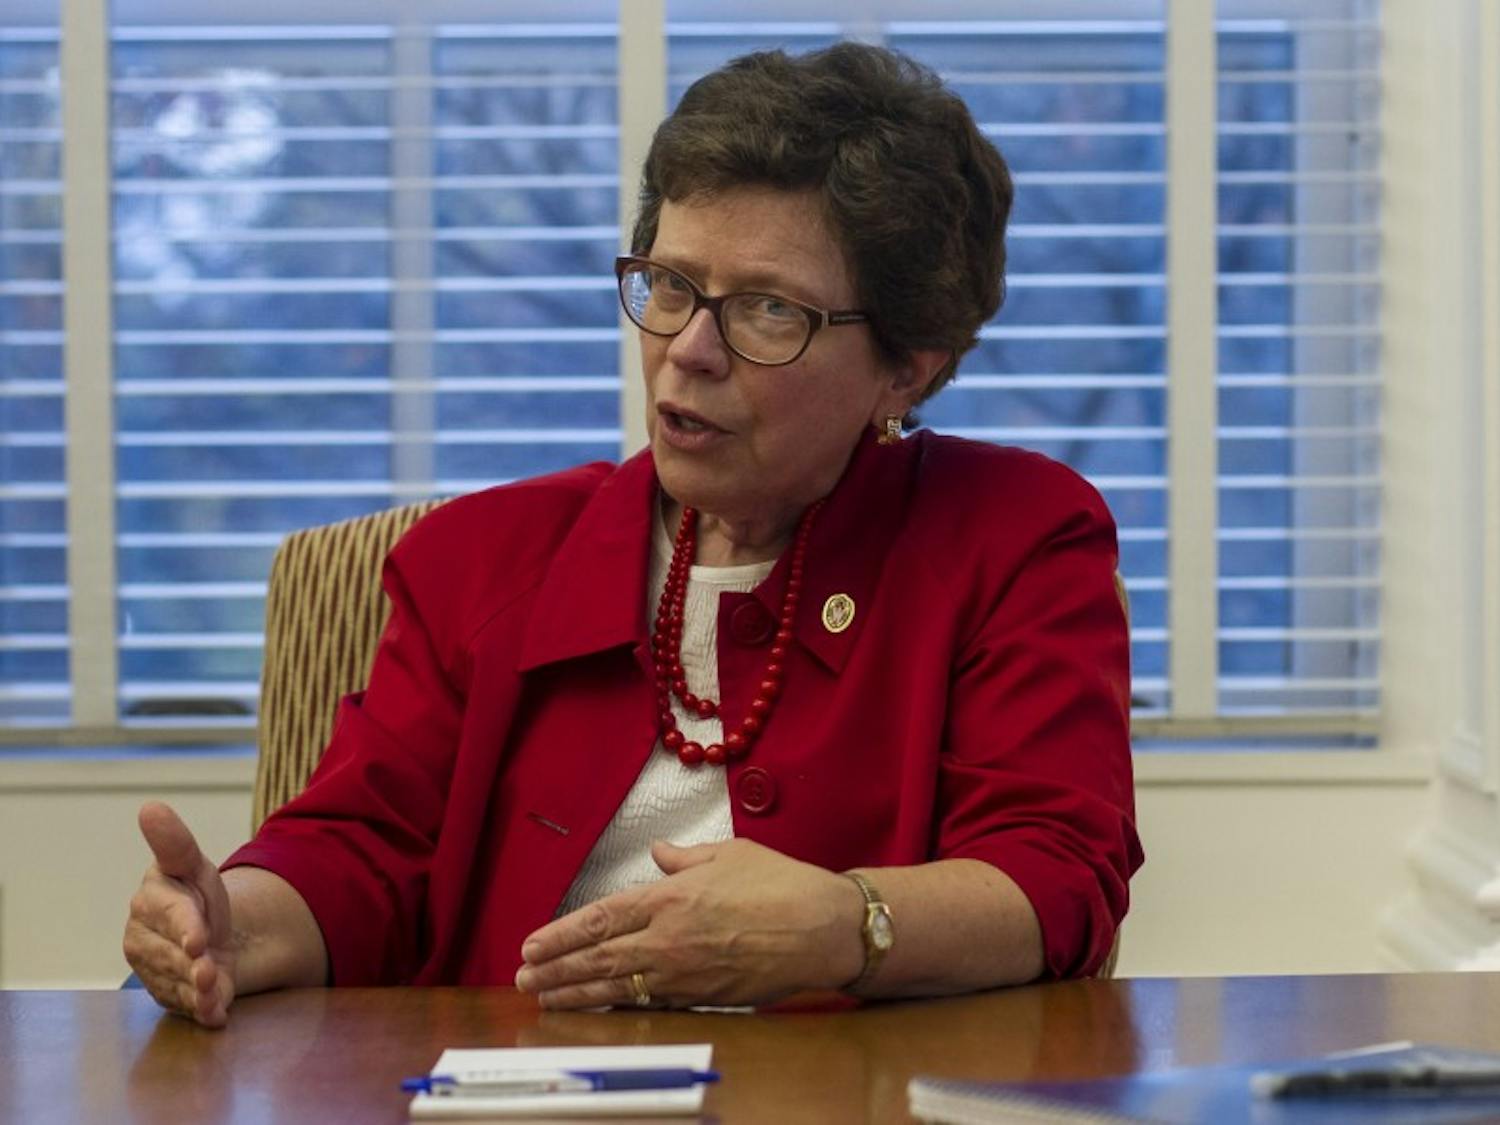 Chancellor Rebecca Blank said President Trump’s plan to repeal DACA “puts at risk a group of promising students at UW-Madison.”